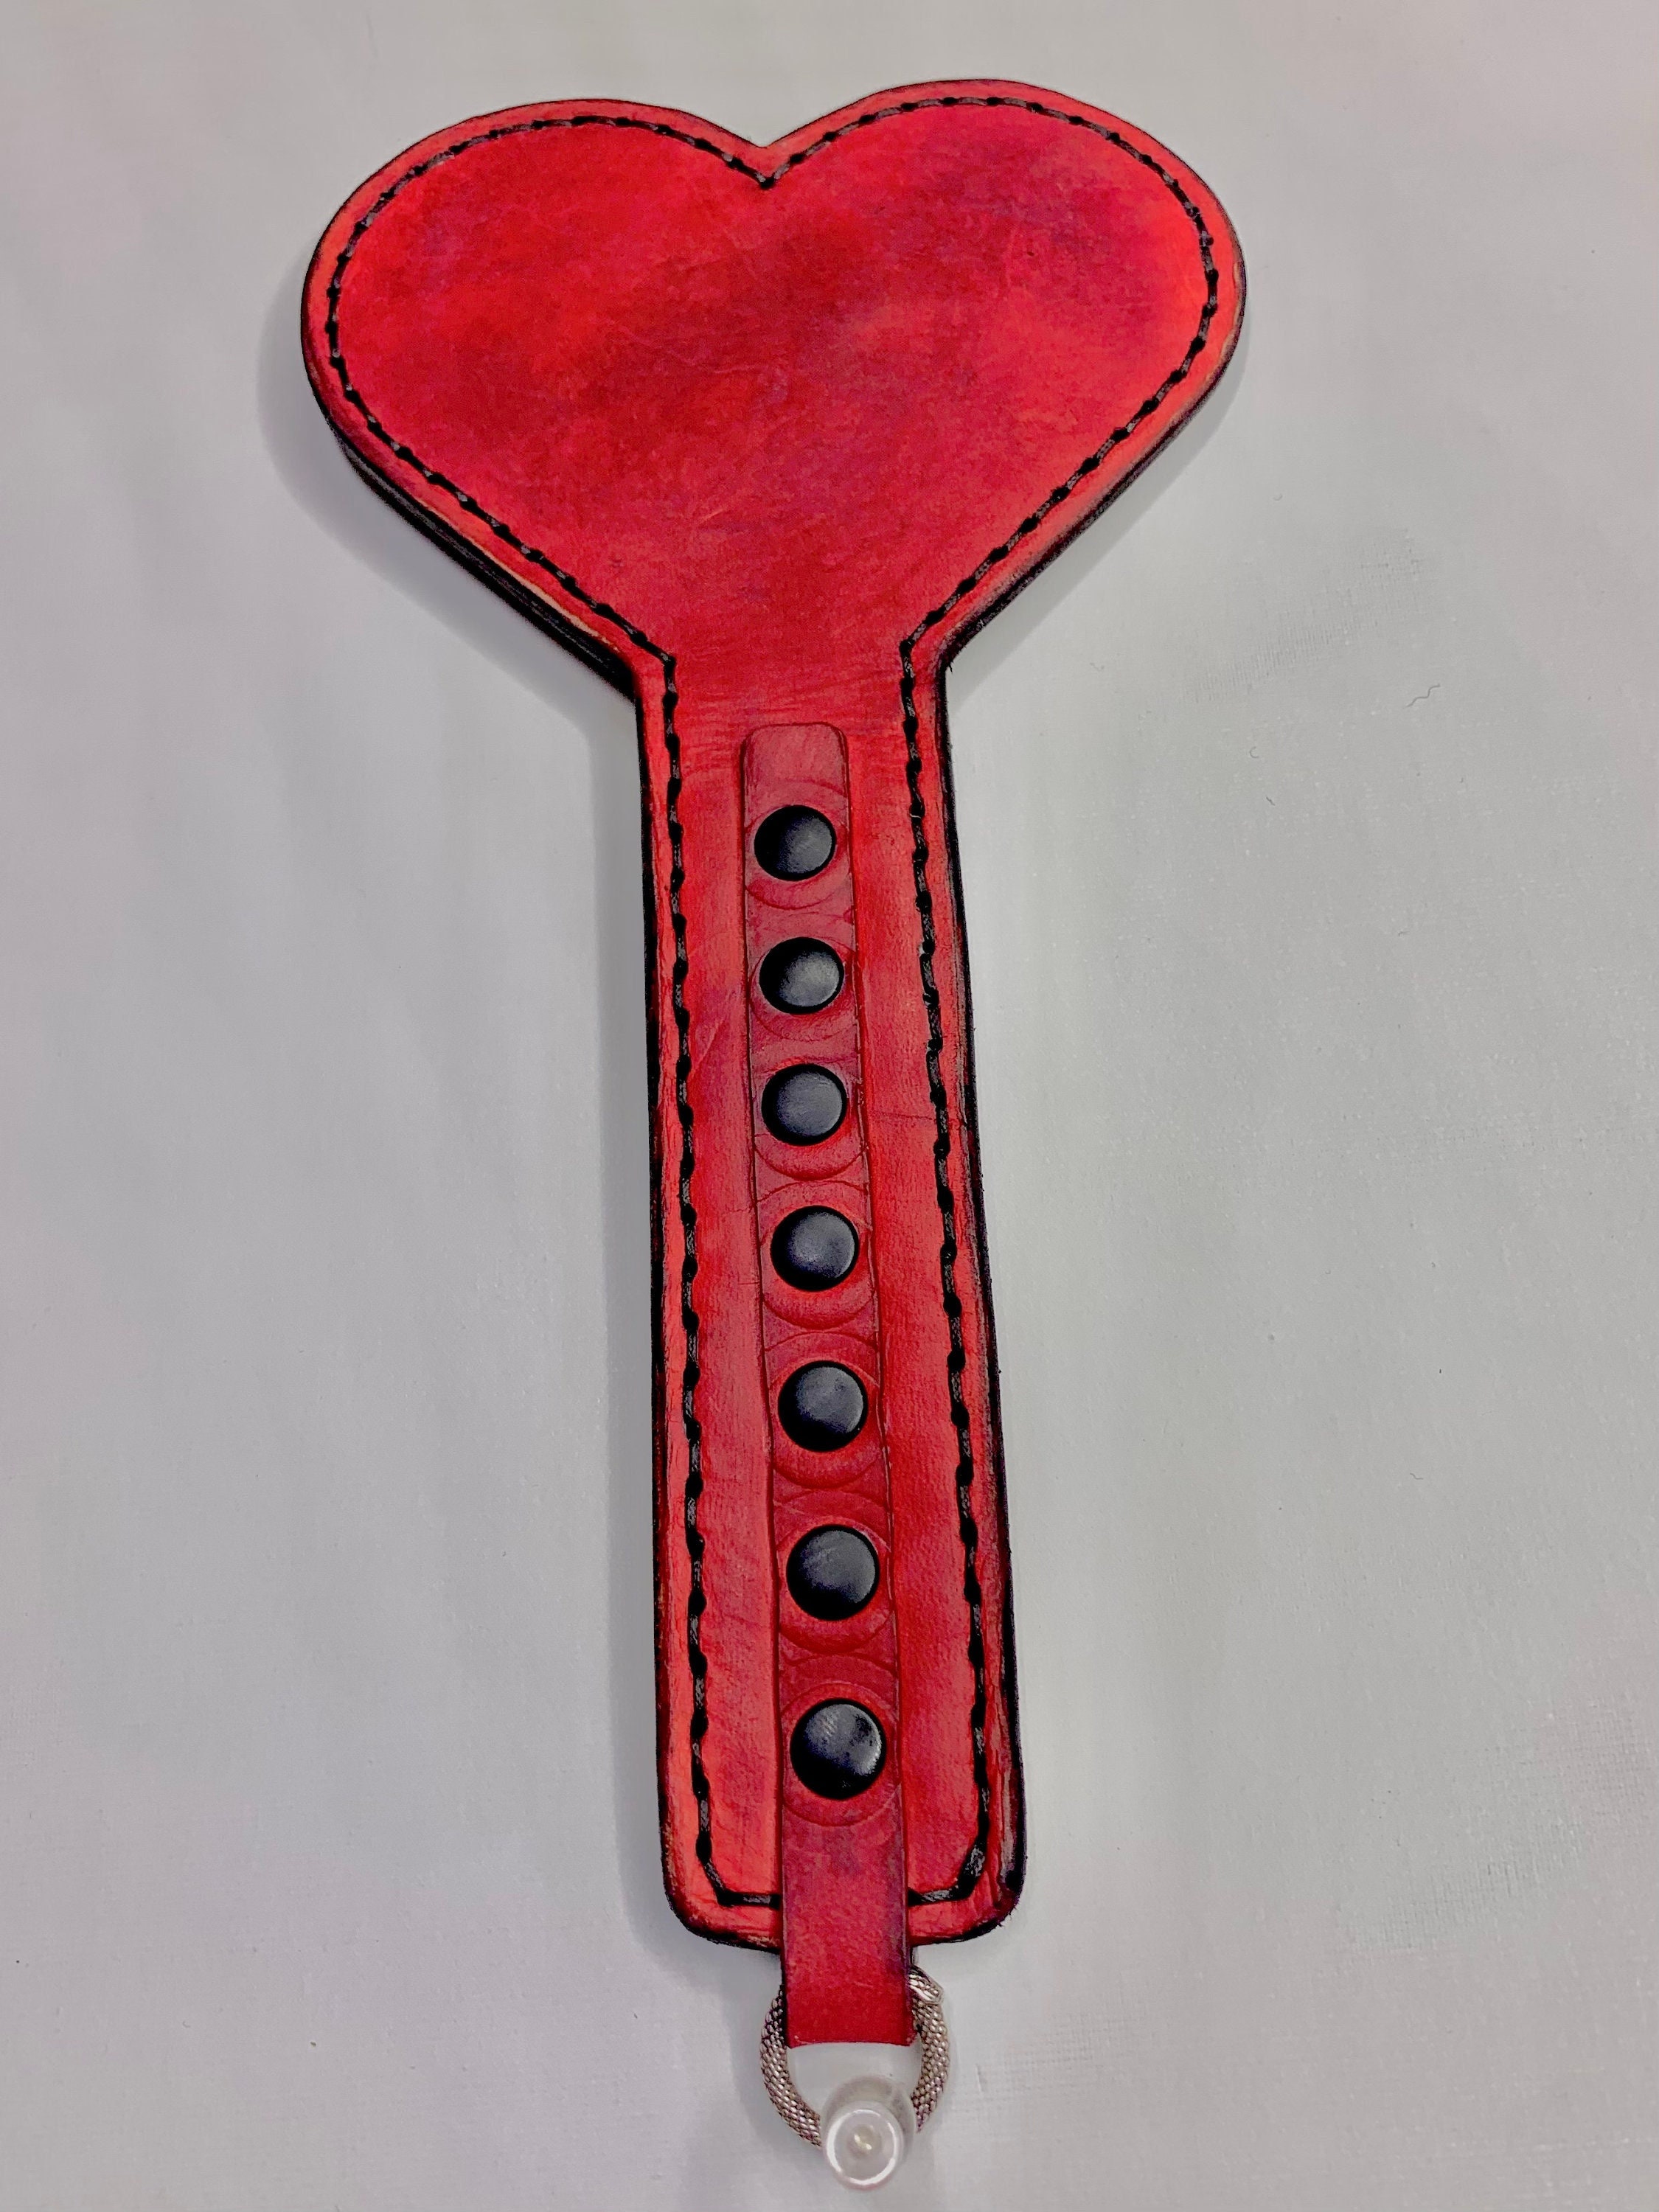 Heavy 12 Inch 4 Layer Leather Paddle Choice of Stitching Color 